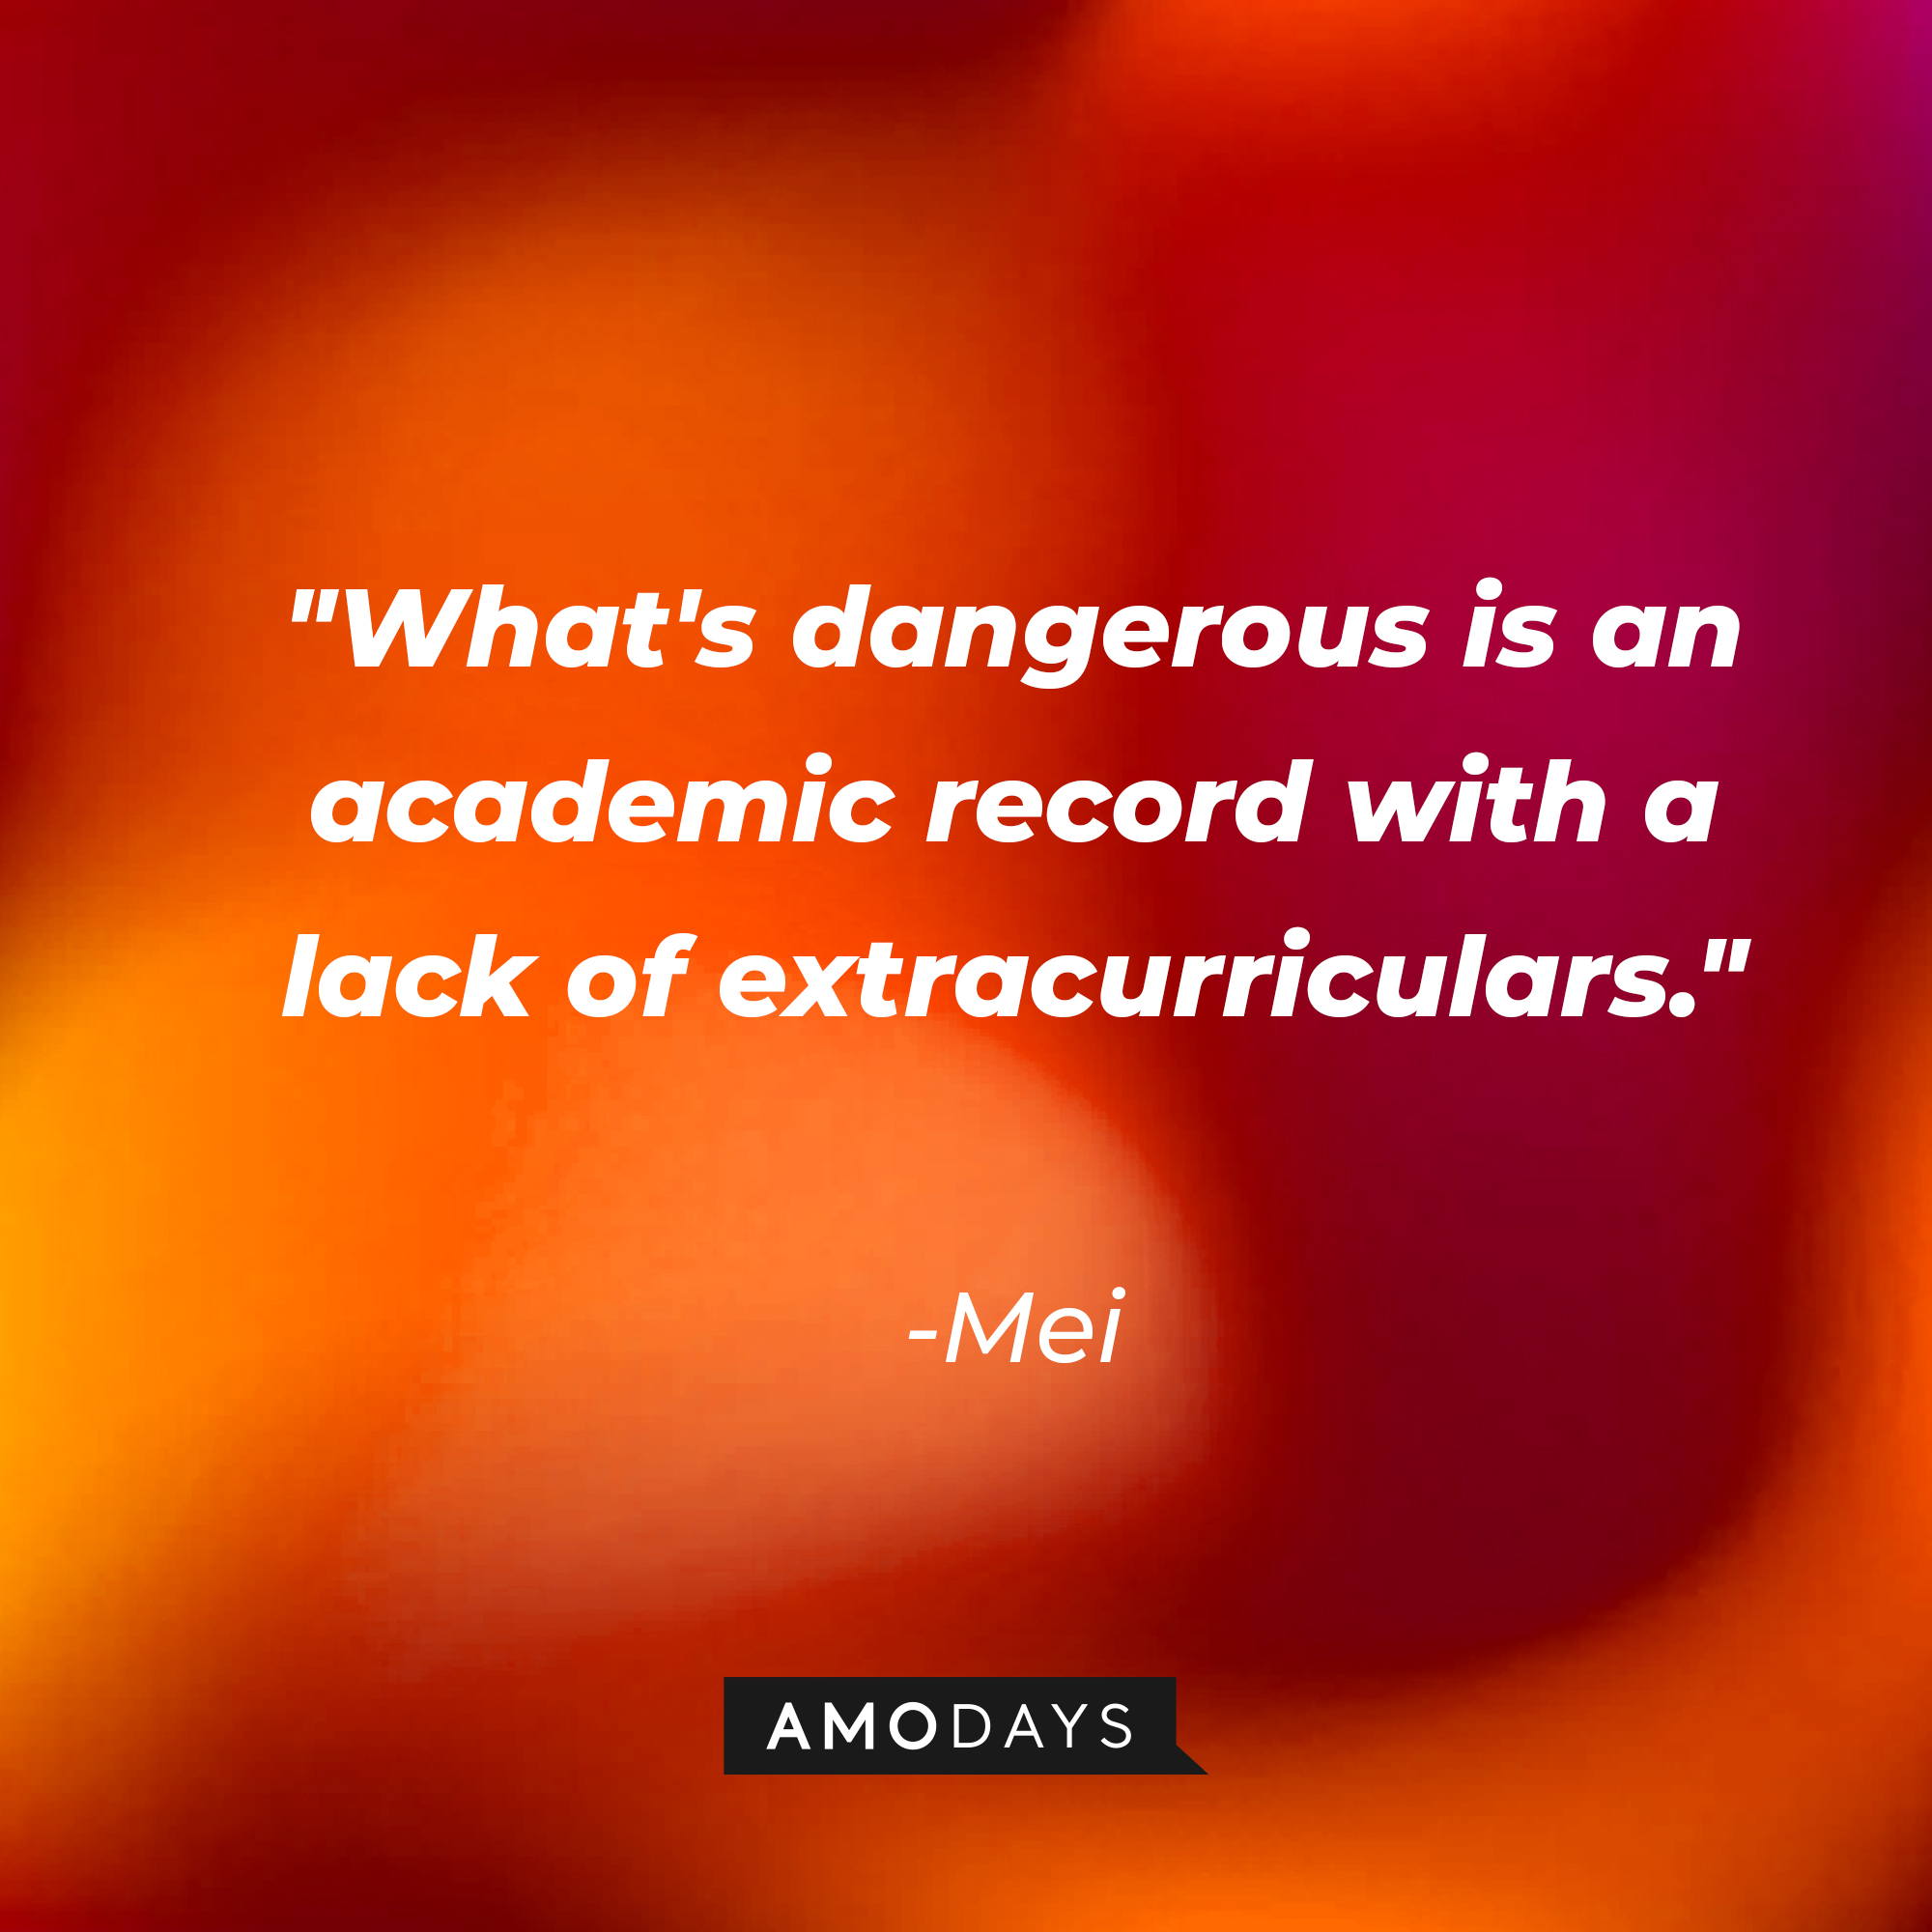 Mei's quote: "What's dangerous is an academic record with a lack of extracurriculars." | Source: AmoDays